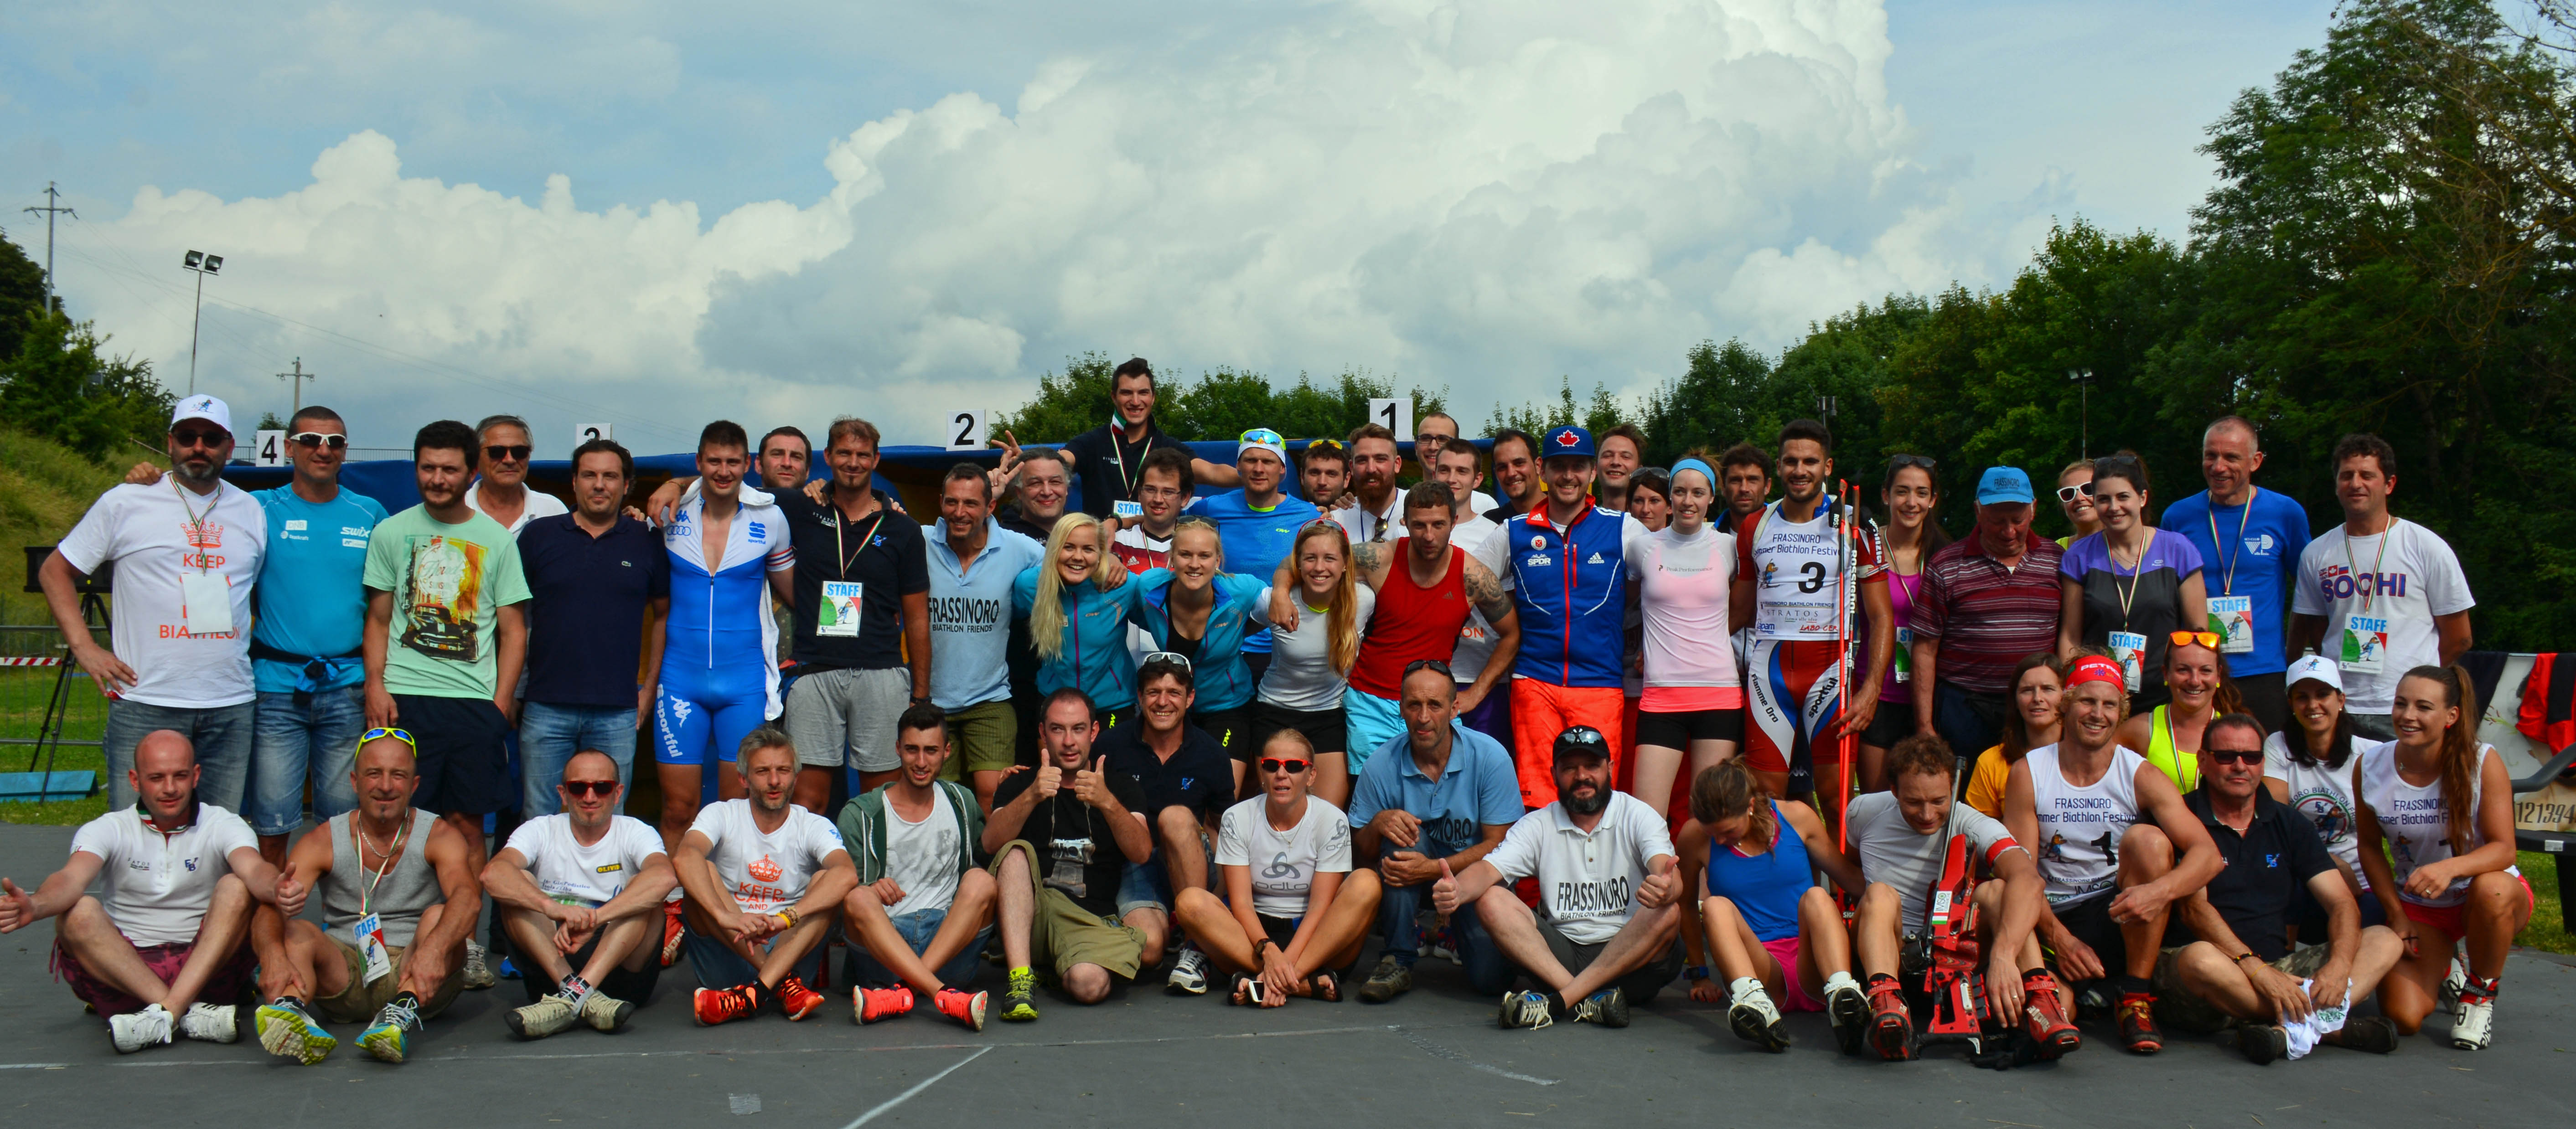 Athletes and volunteers at the festival. (Photo: Davide Magnaghi)